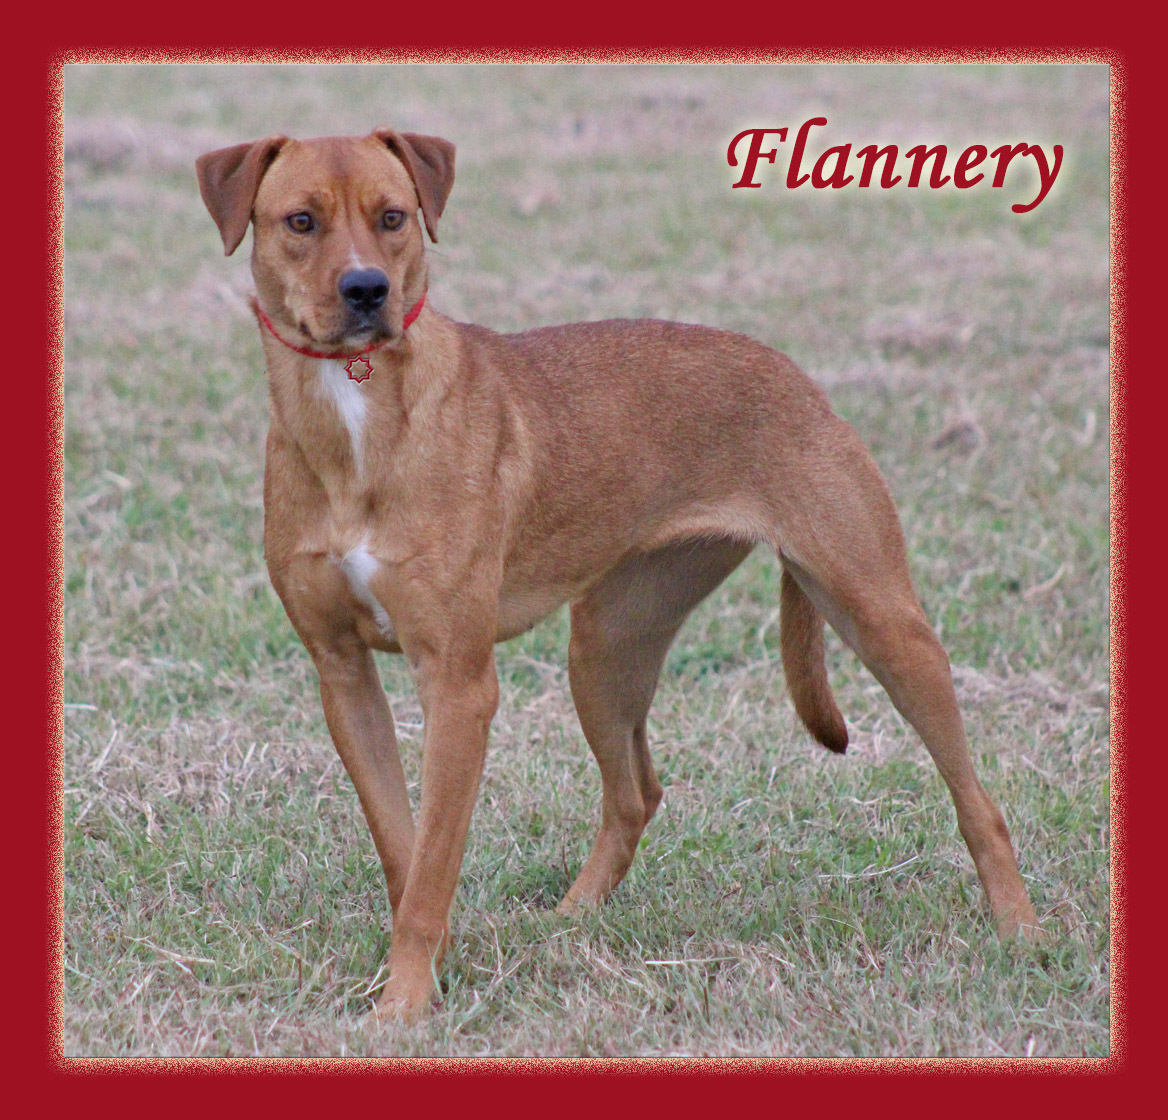 Flannery